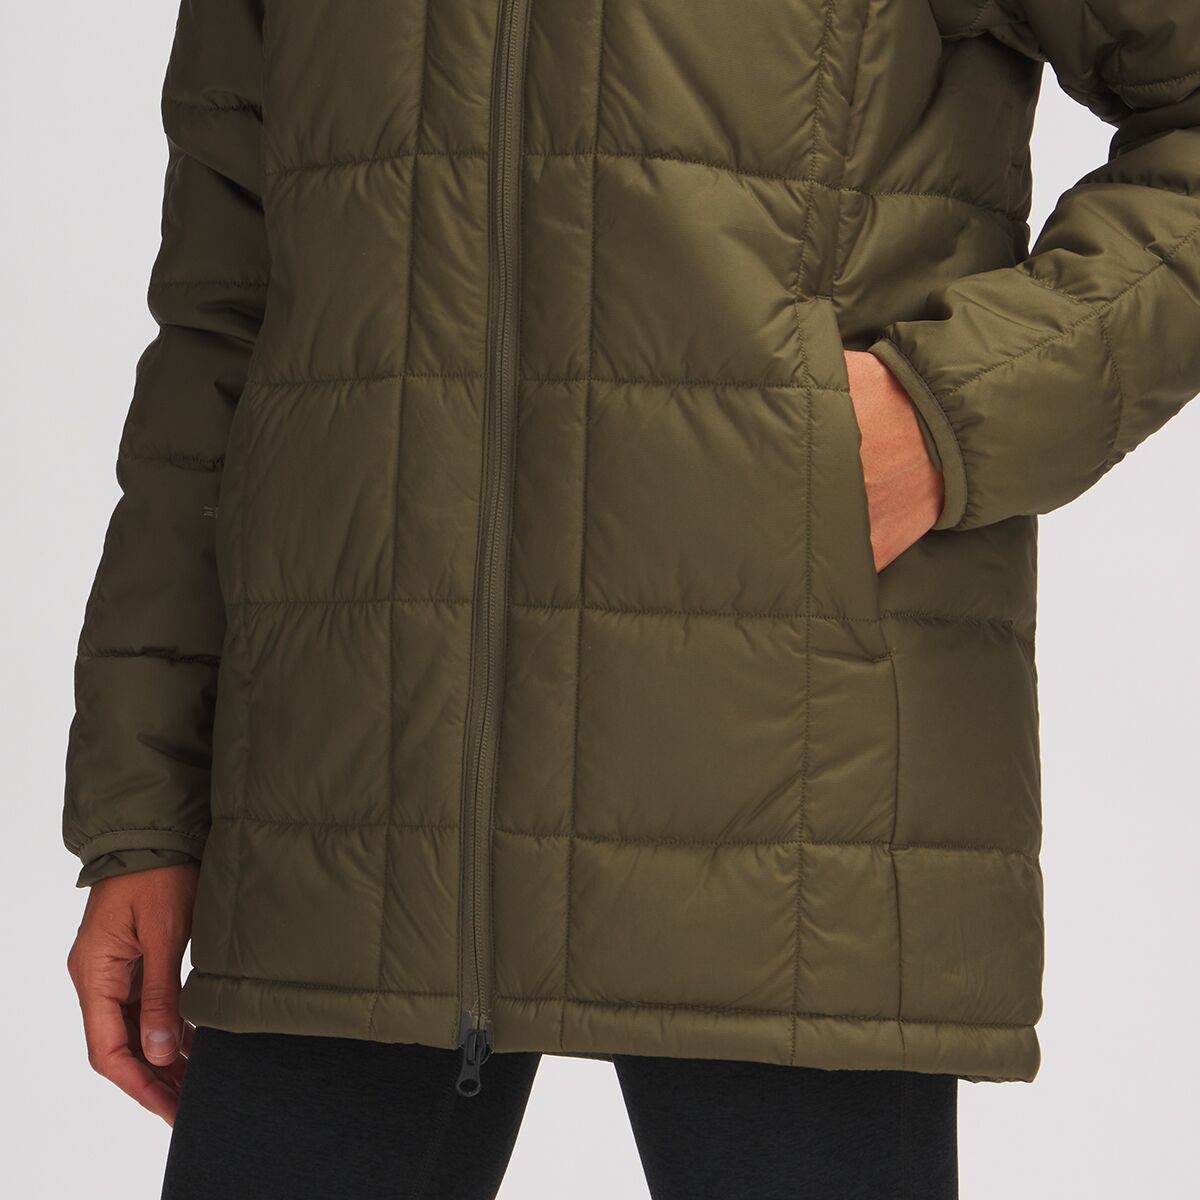 Stoic Venture Insulated Parka - Women's - Clothing